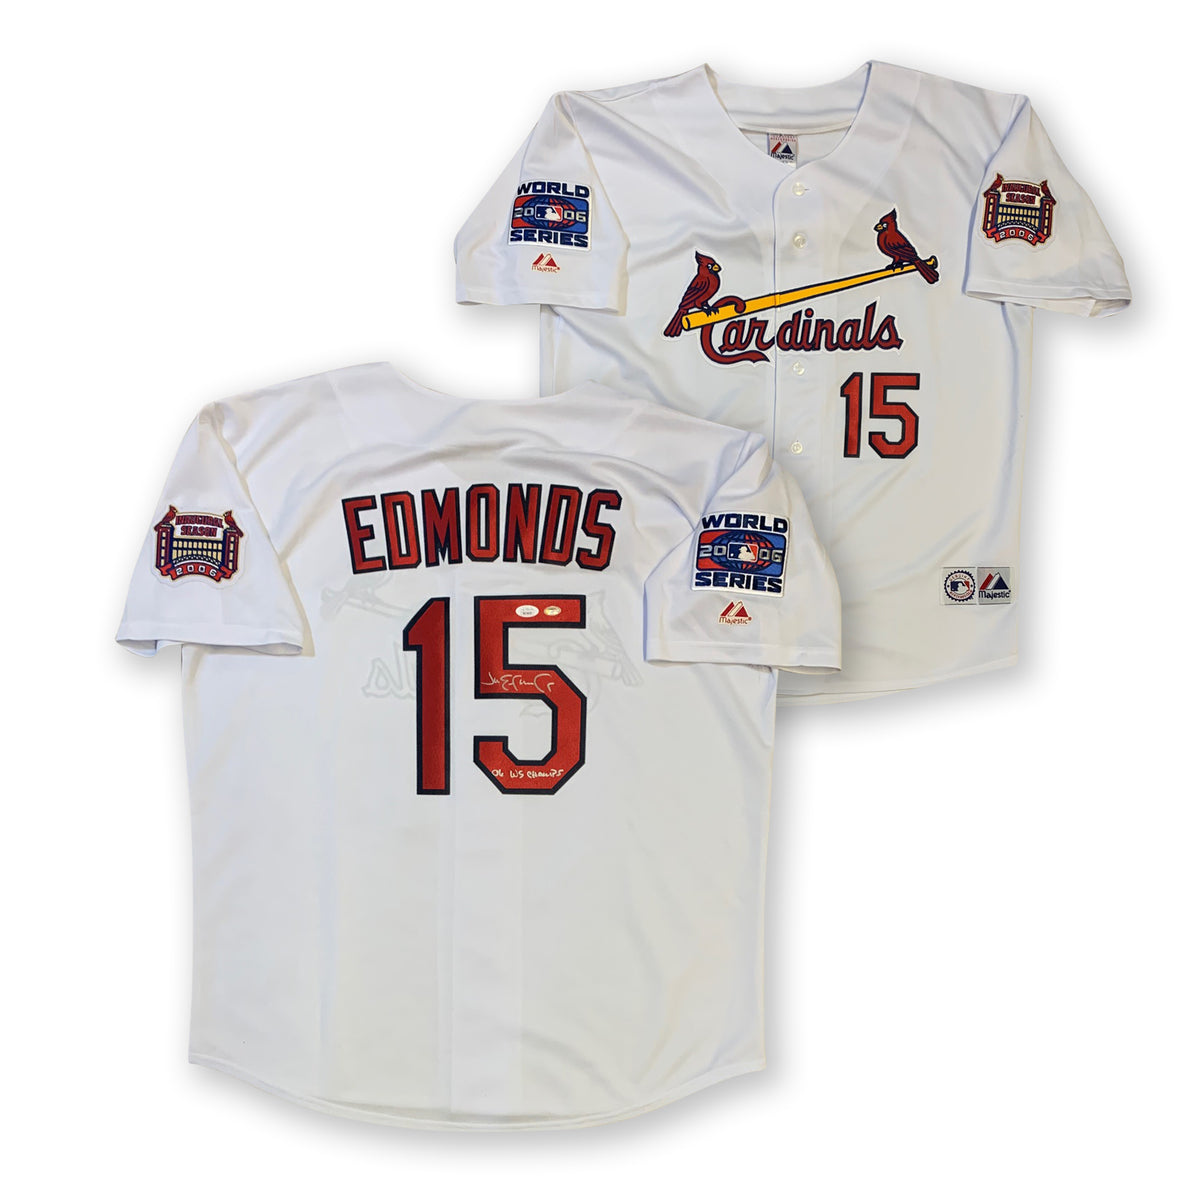 Autographed Signed Baseball Jerseys - Authenticated + FREE Shipping